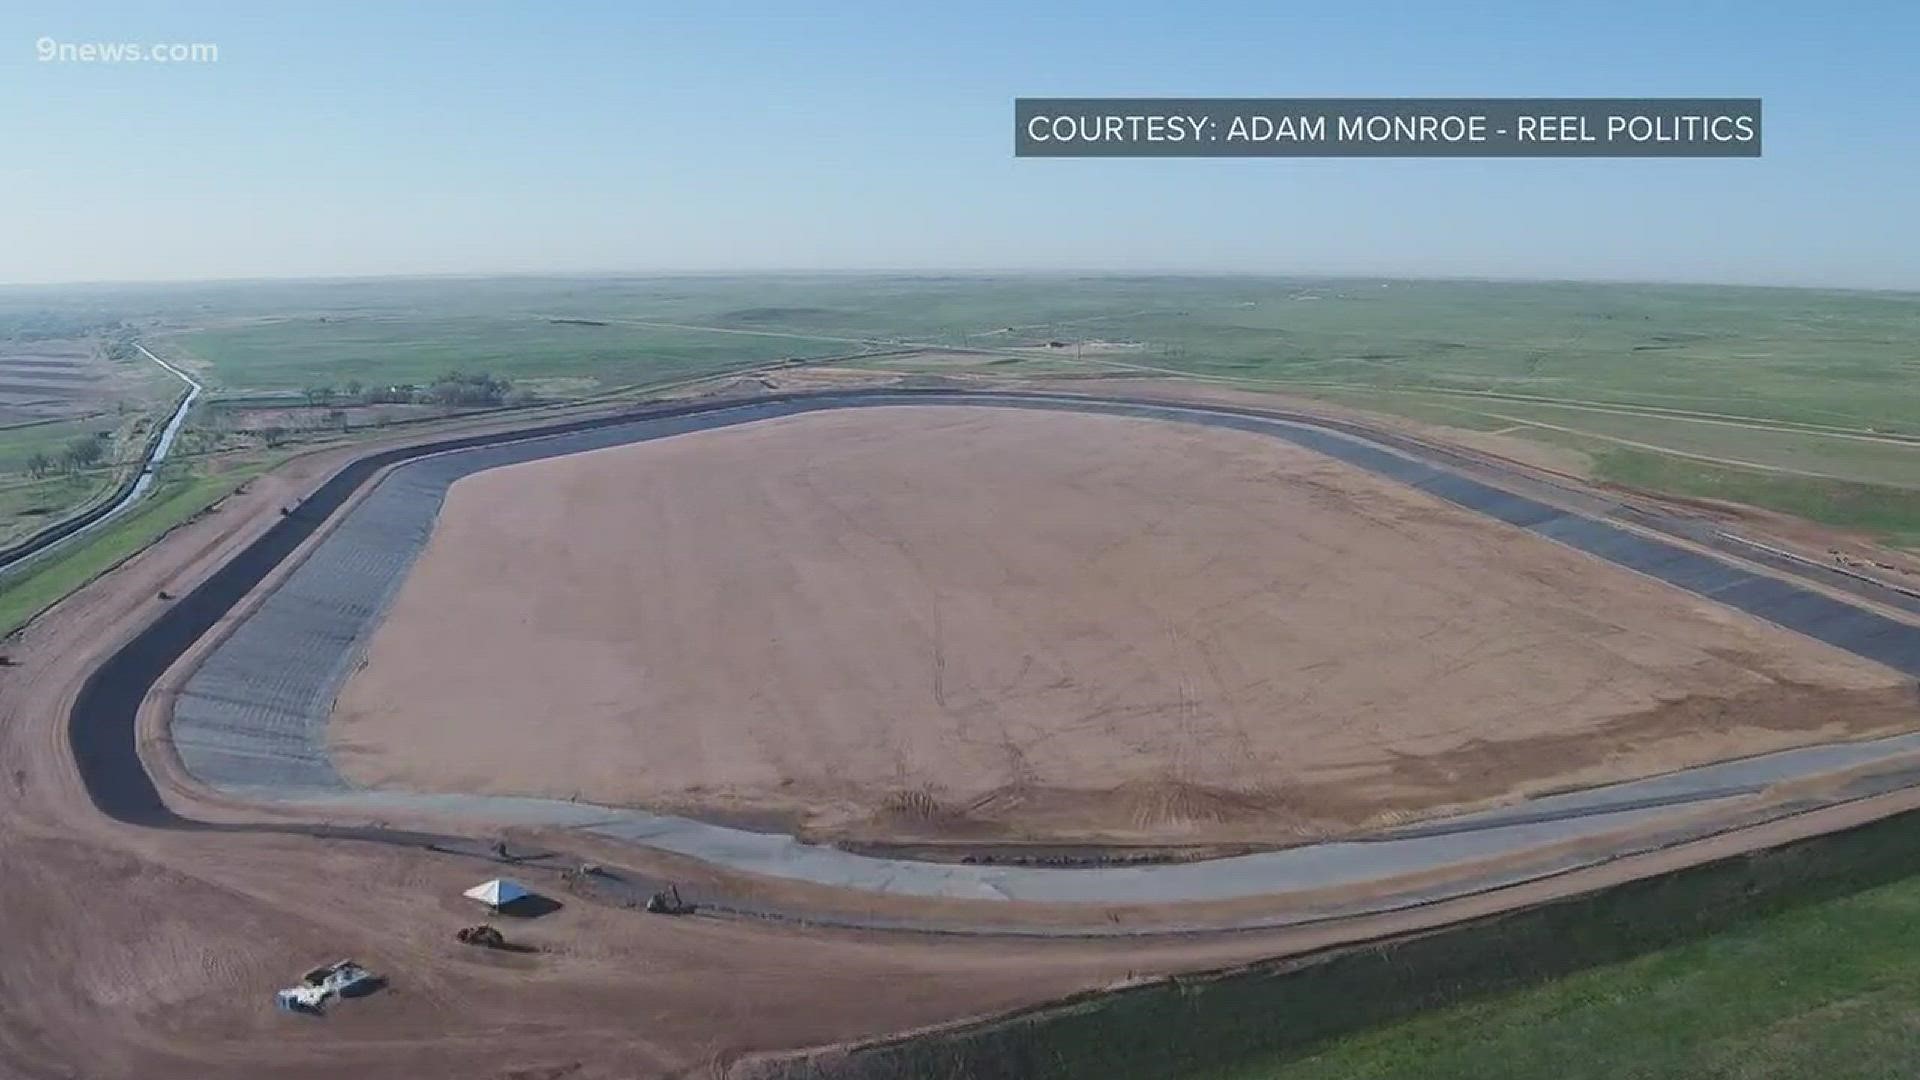 The new 70 Ranch Reservoir in Weld County is the largest lined reservoir in the country at nearly 6000 acre-feet. It could be on the cutting edge of how we store water in the future.